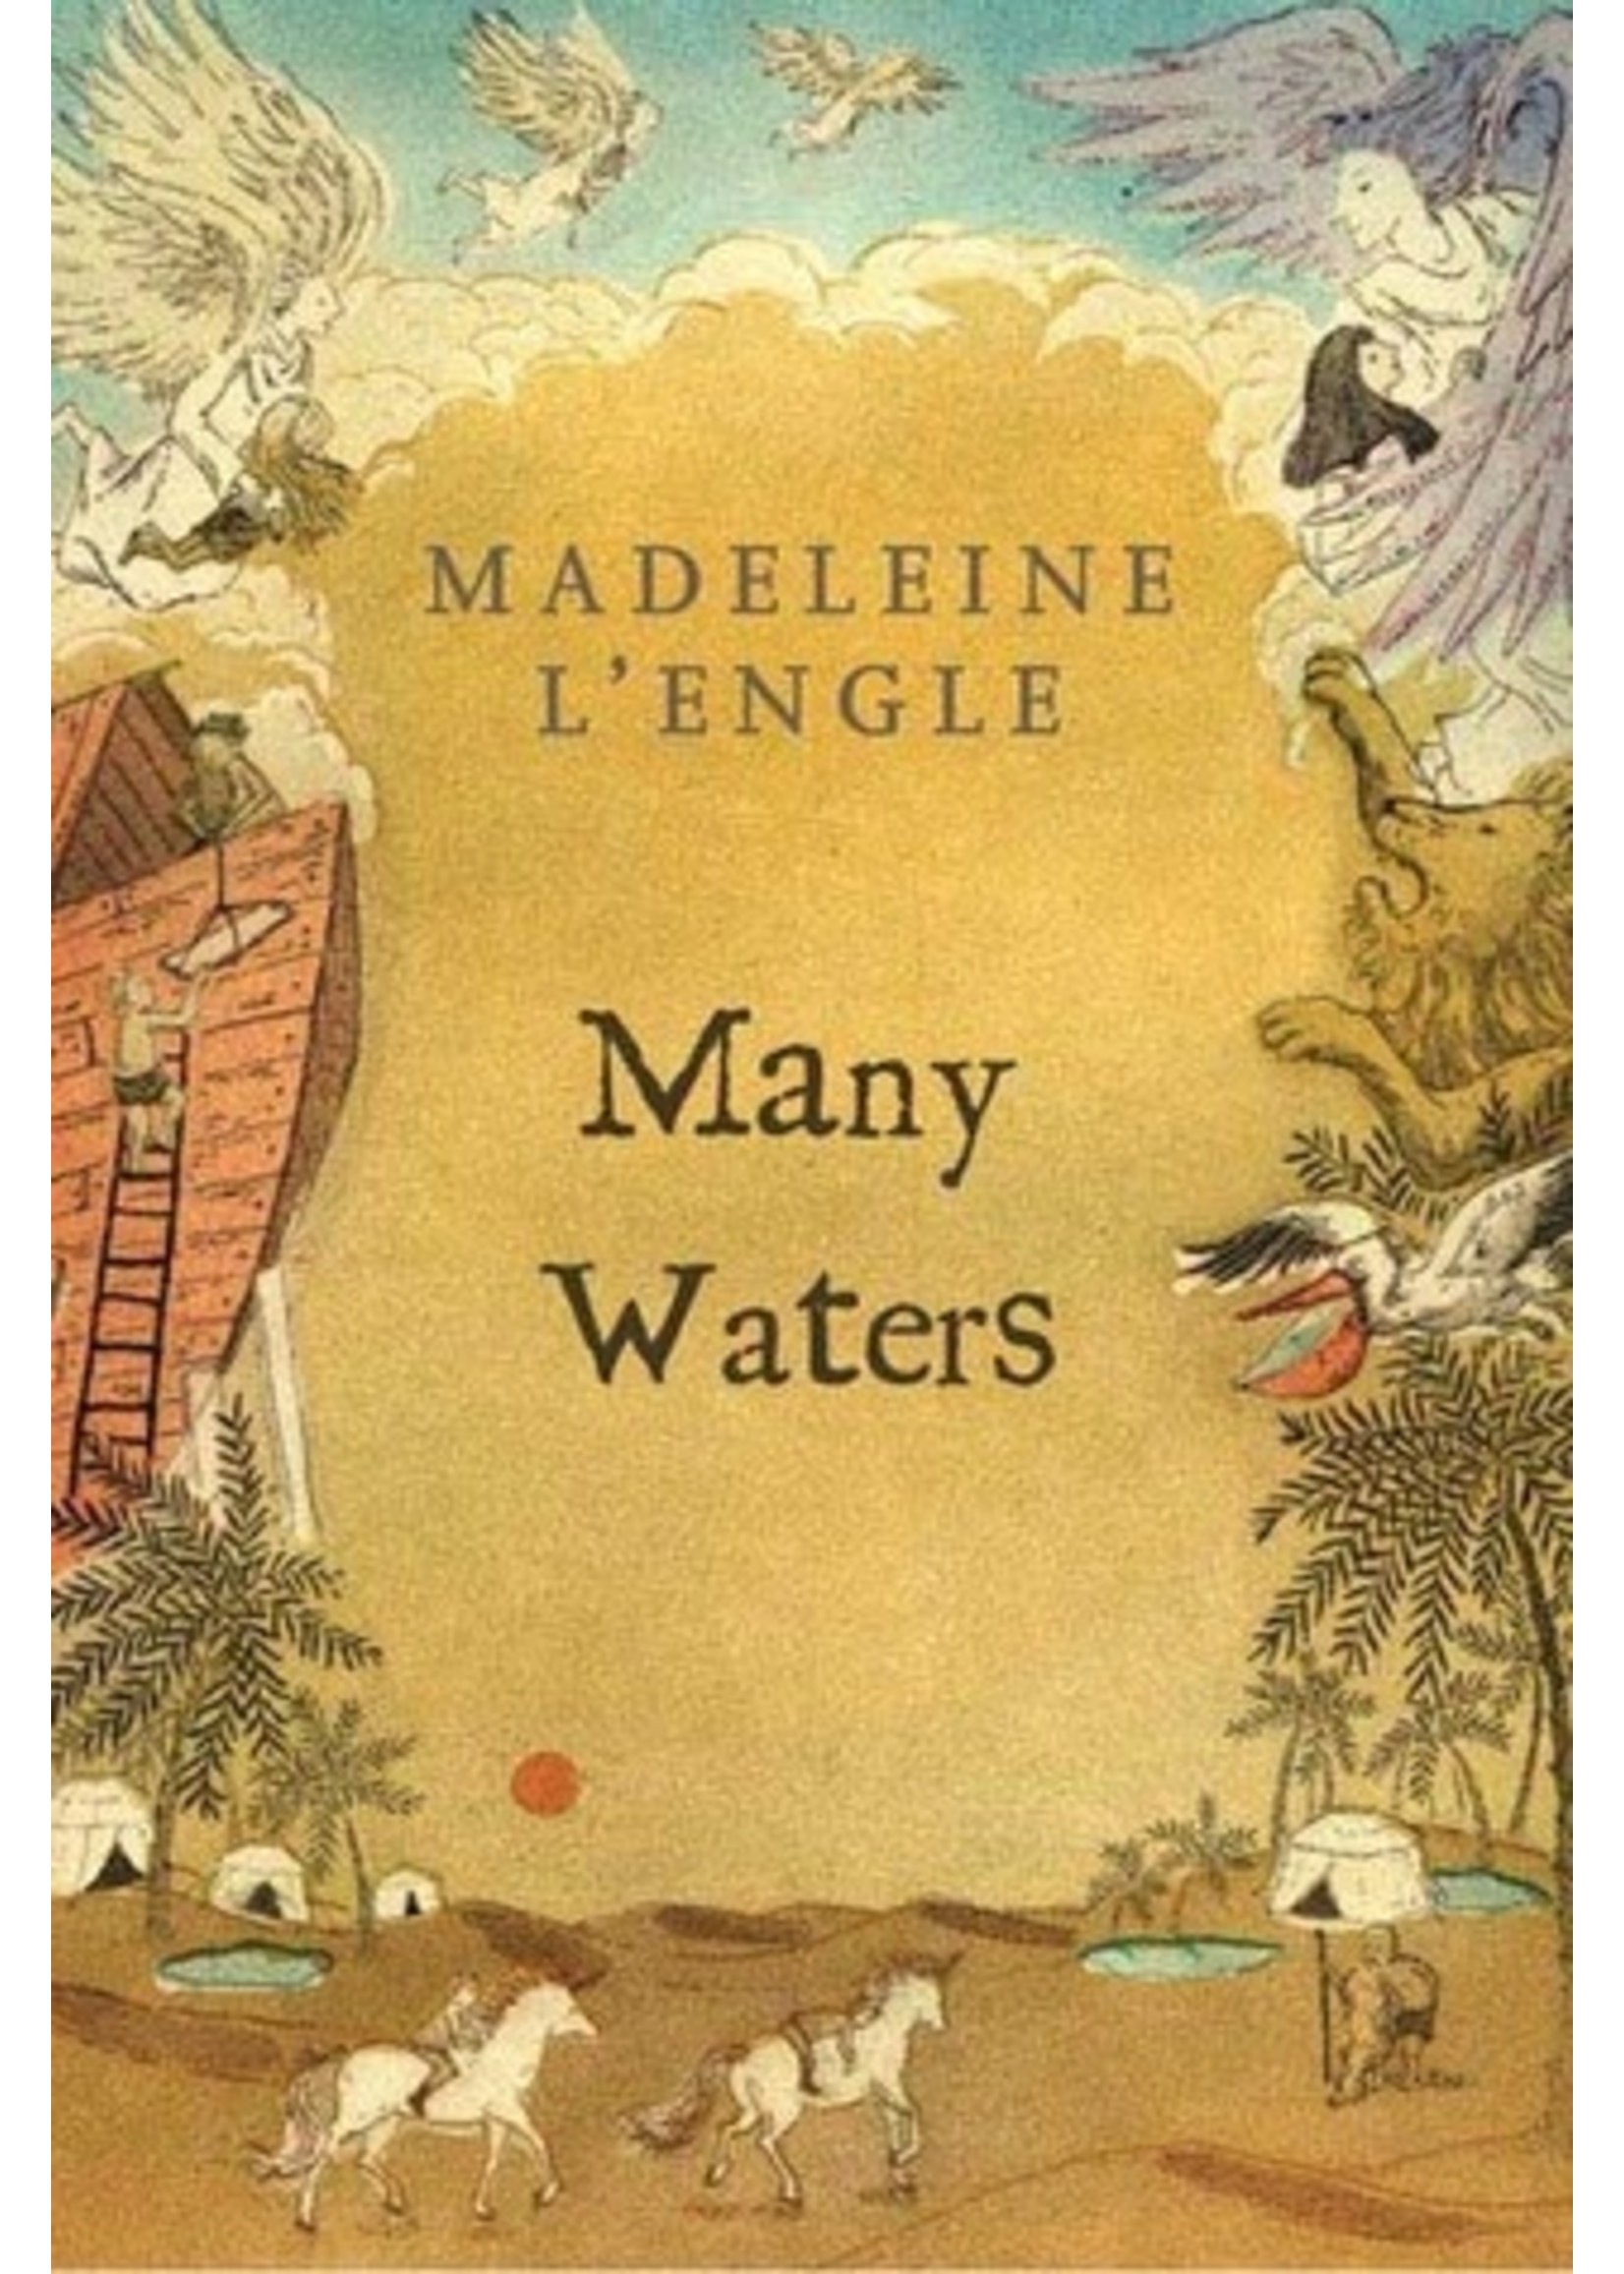 Many Waters (Time Quintet #4) by Madeleine L'Engle